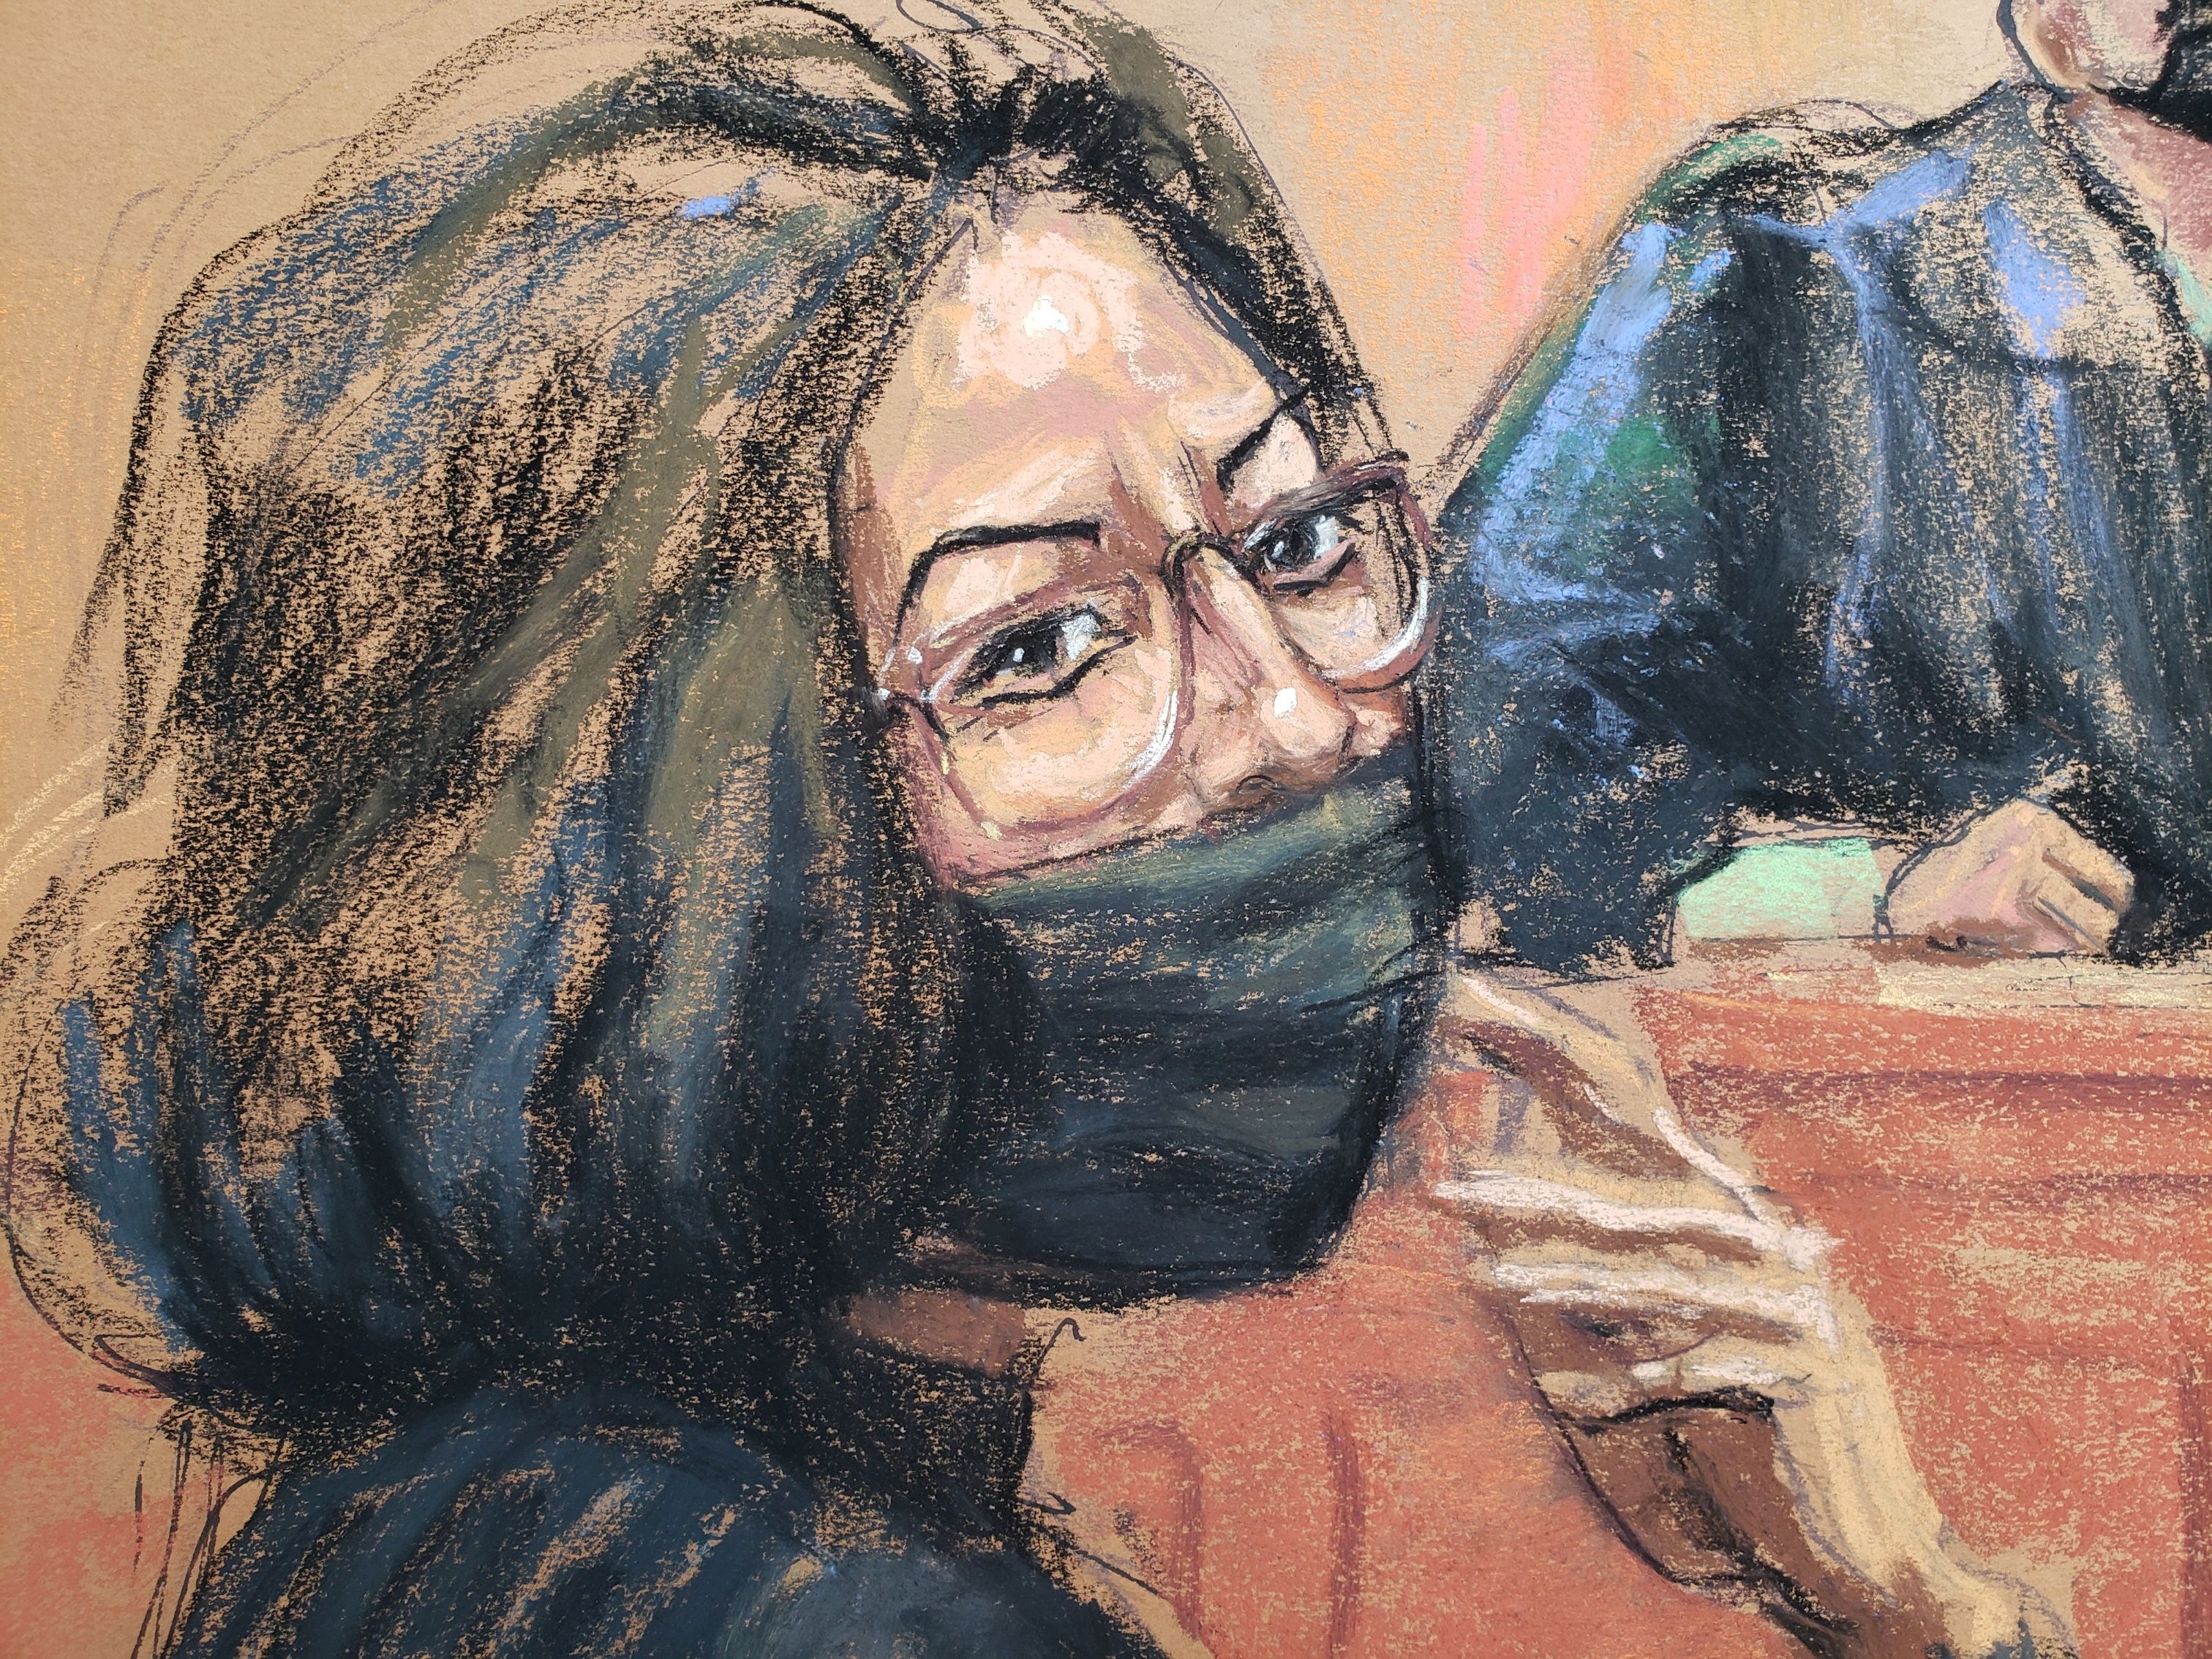 Ghislaine Maxwell, Jeffrey Epstein's associate accused of sex trafficking, appears before Judge Alison Nathan during jury selection for Maxwell's trial, in a courtroom sketch in New York City, U.S., November 16, 2021. REUTERS/Jane Rosenberg